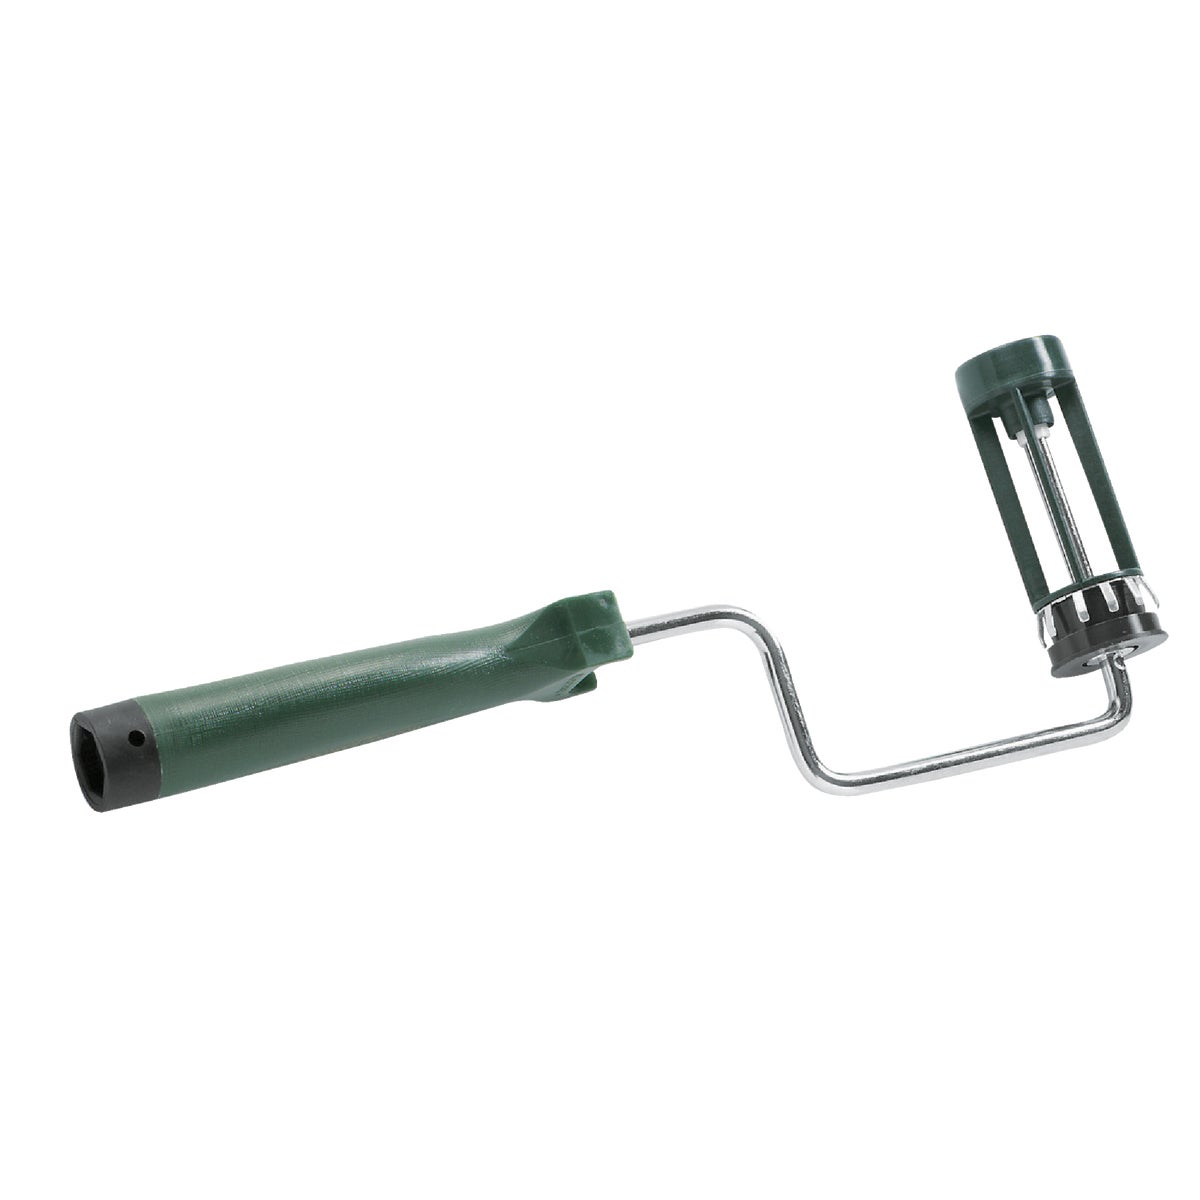 Item 793643, Quick release retaining springs locks roller in place, yet allows easy one-